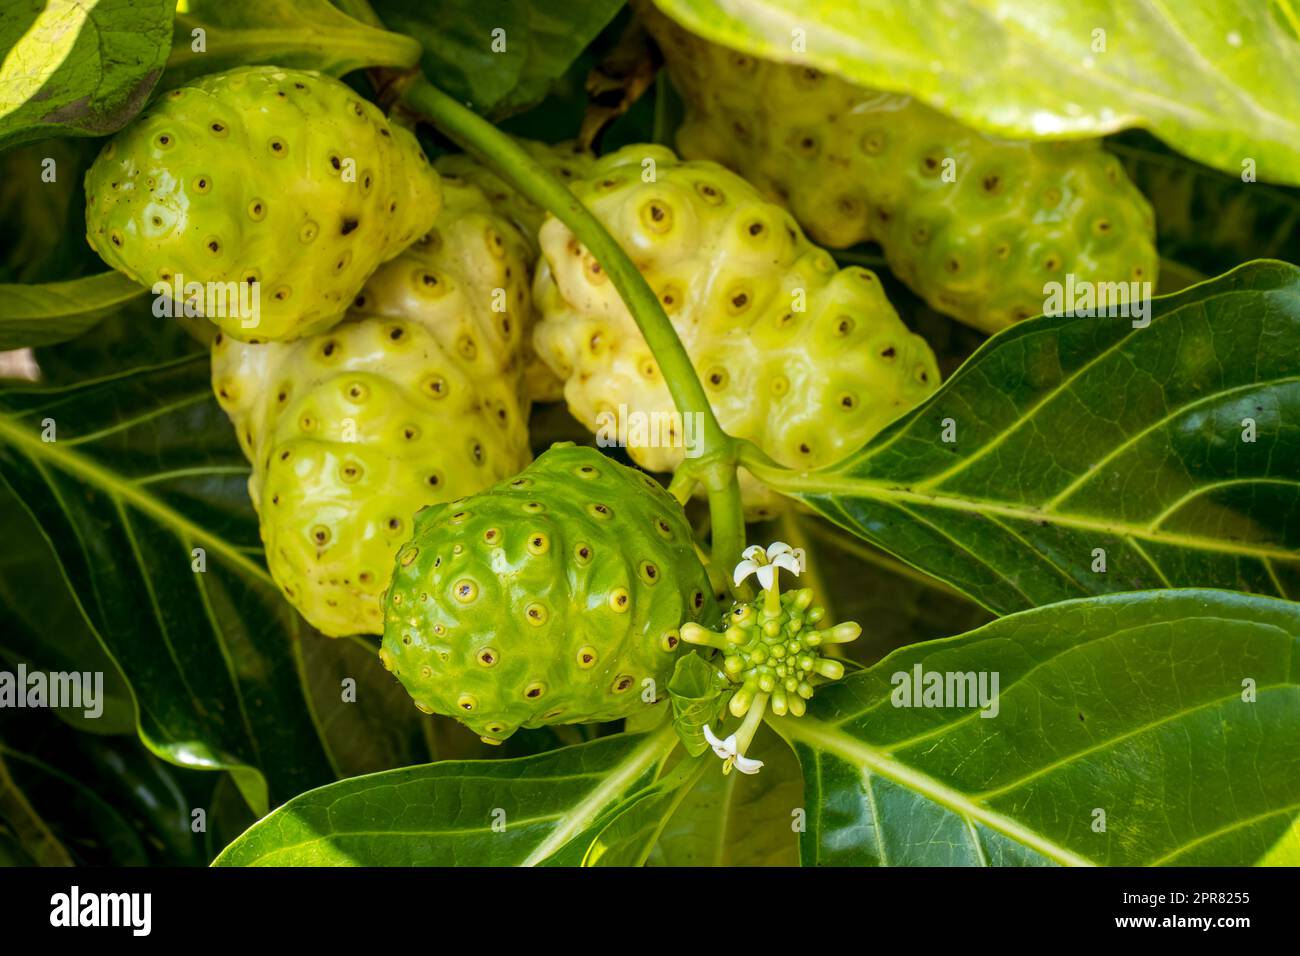 Great Morinda, also known as Indian Mulberry or Noni fruit, ready for nourishment and refreshment, perfect for those seeking a healthy, tropical plant Stock Photo